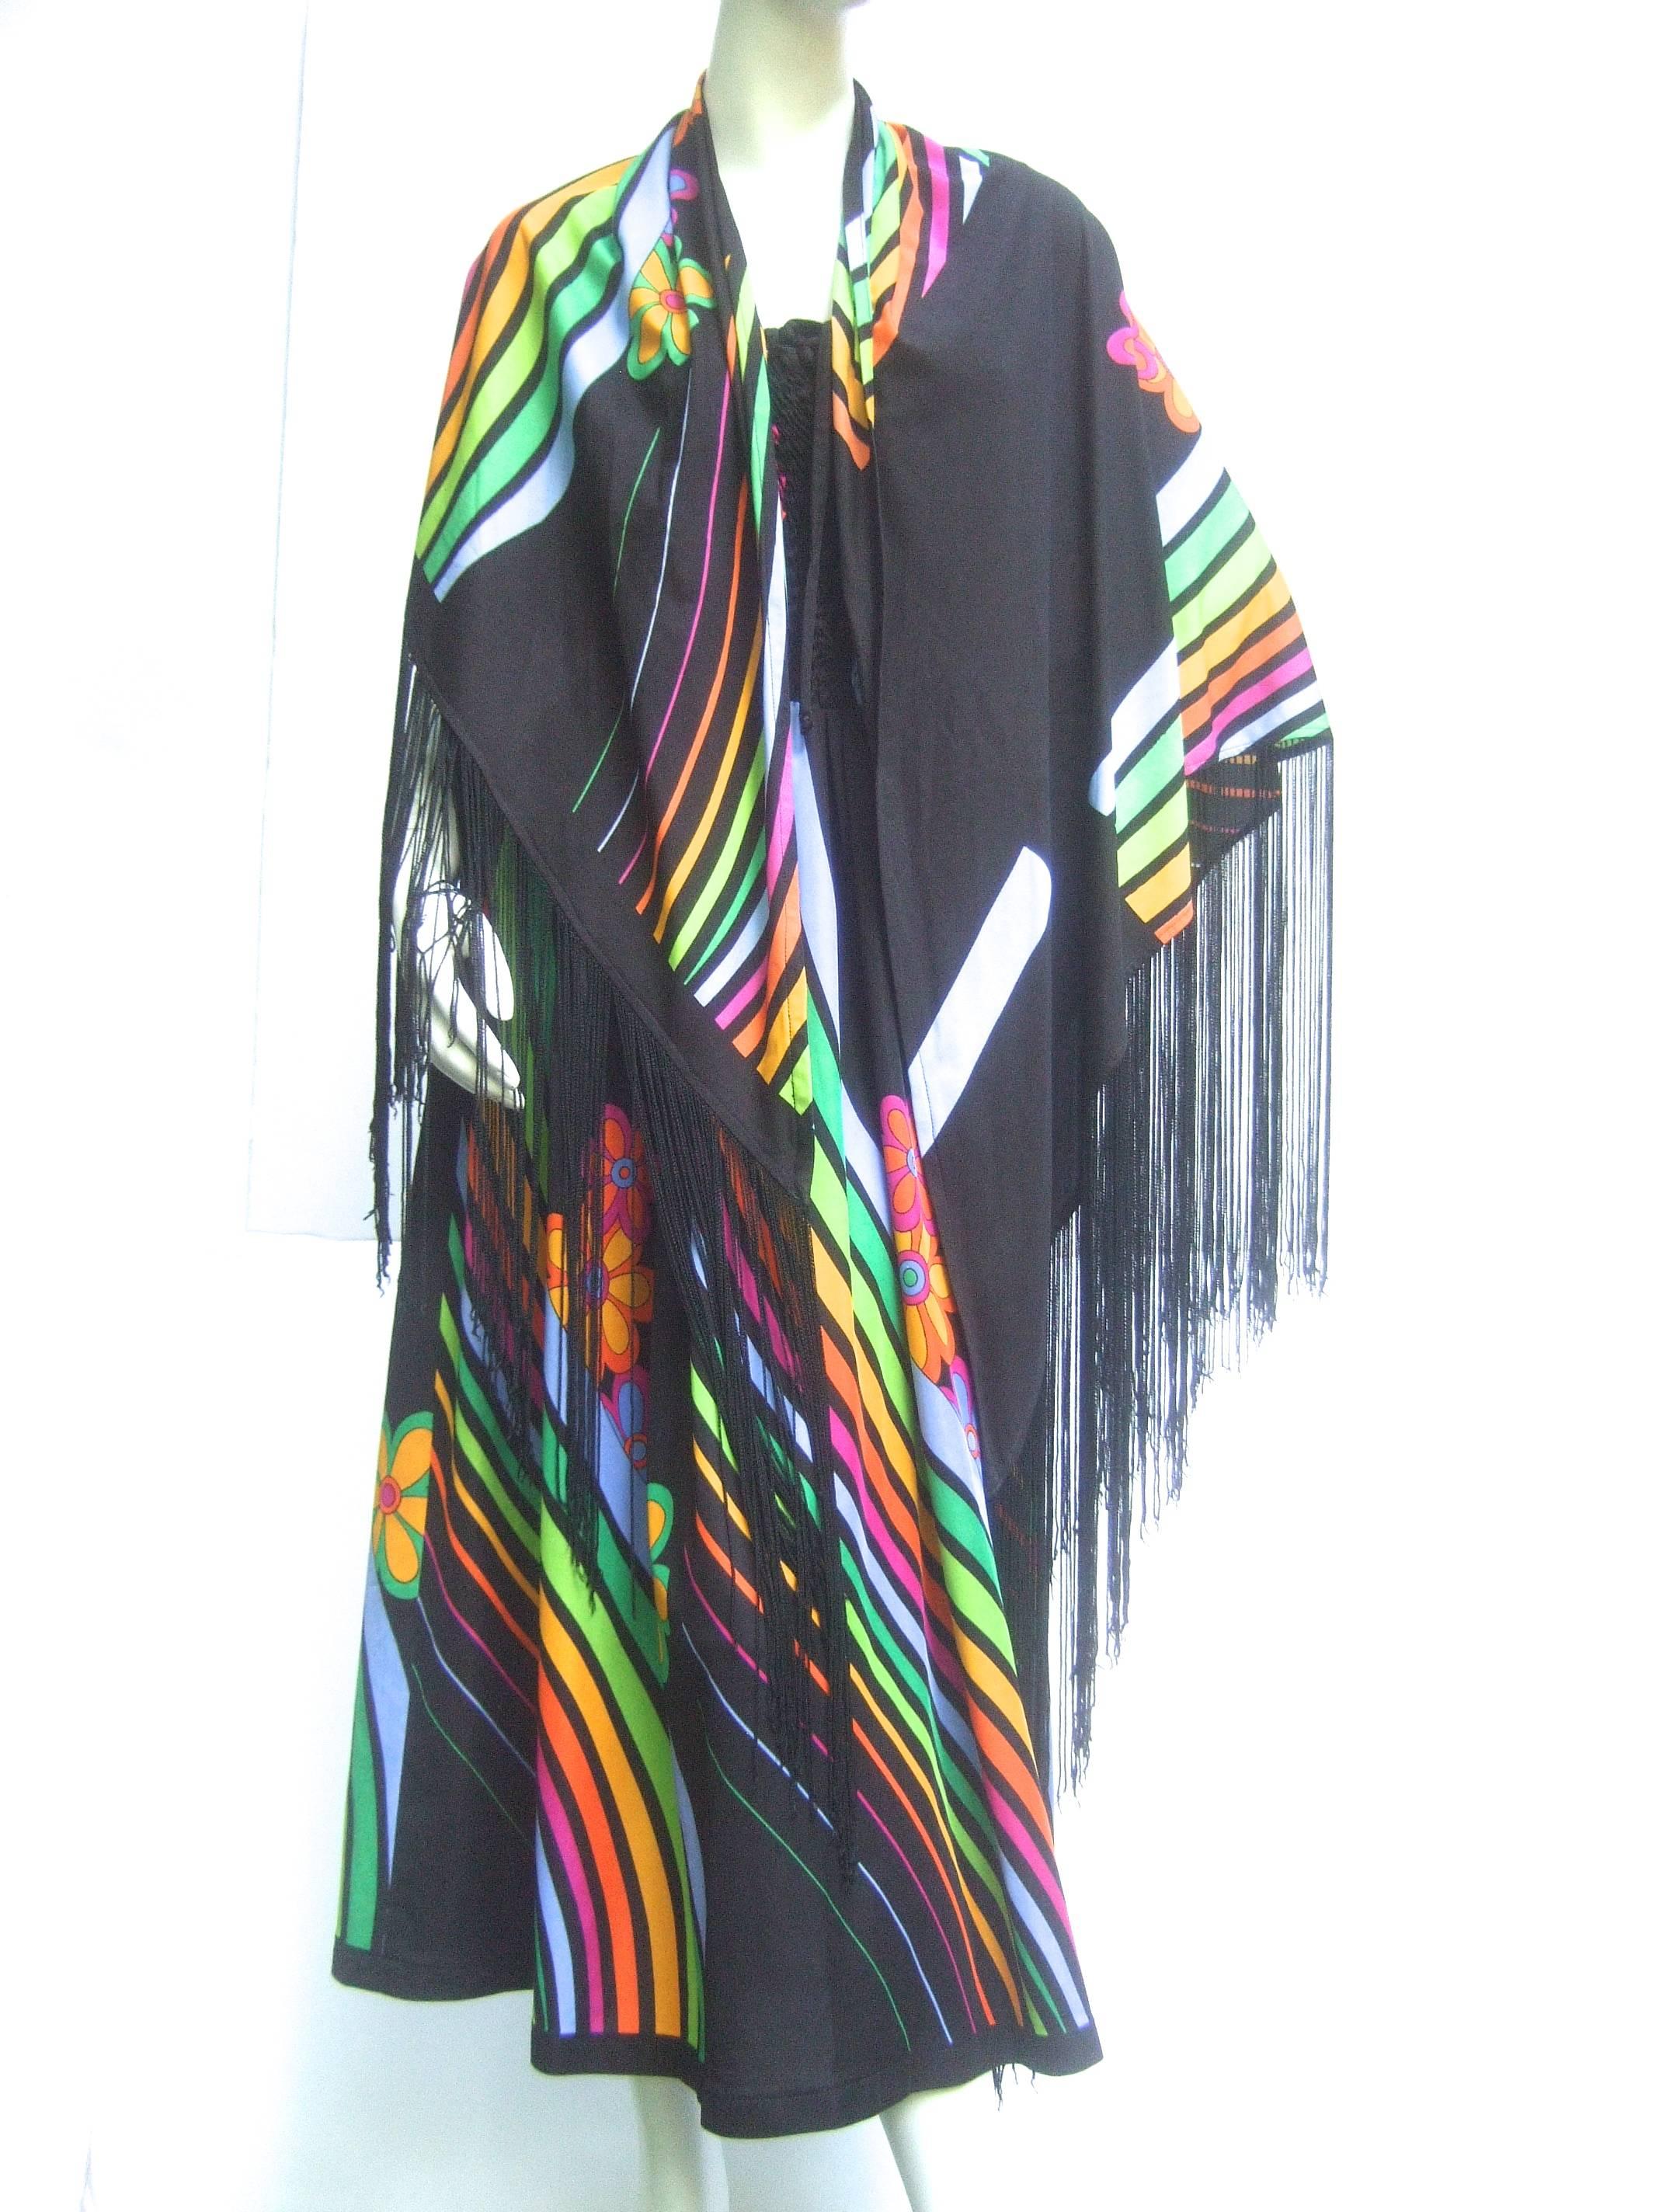 Super Cool 70's Bodice Dress with Fringed Cape. For Sale 5